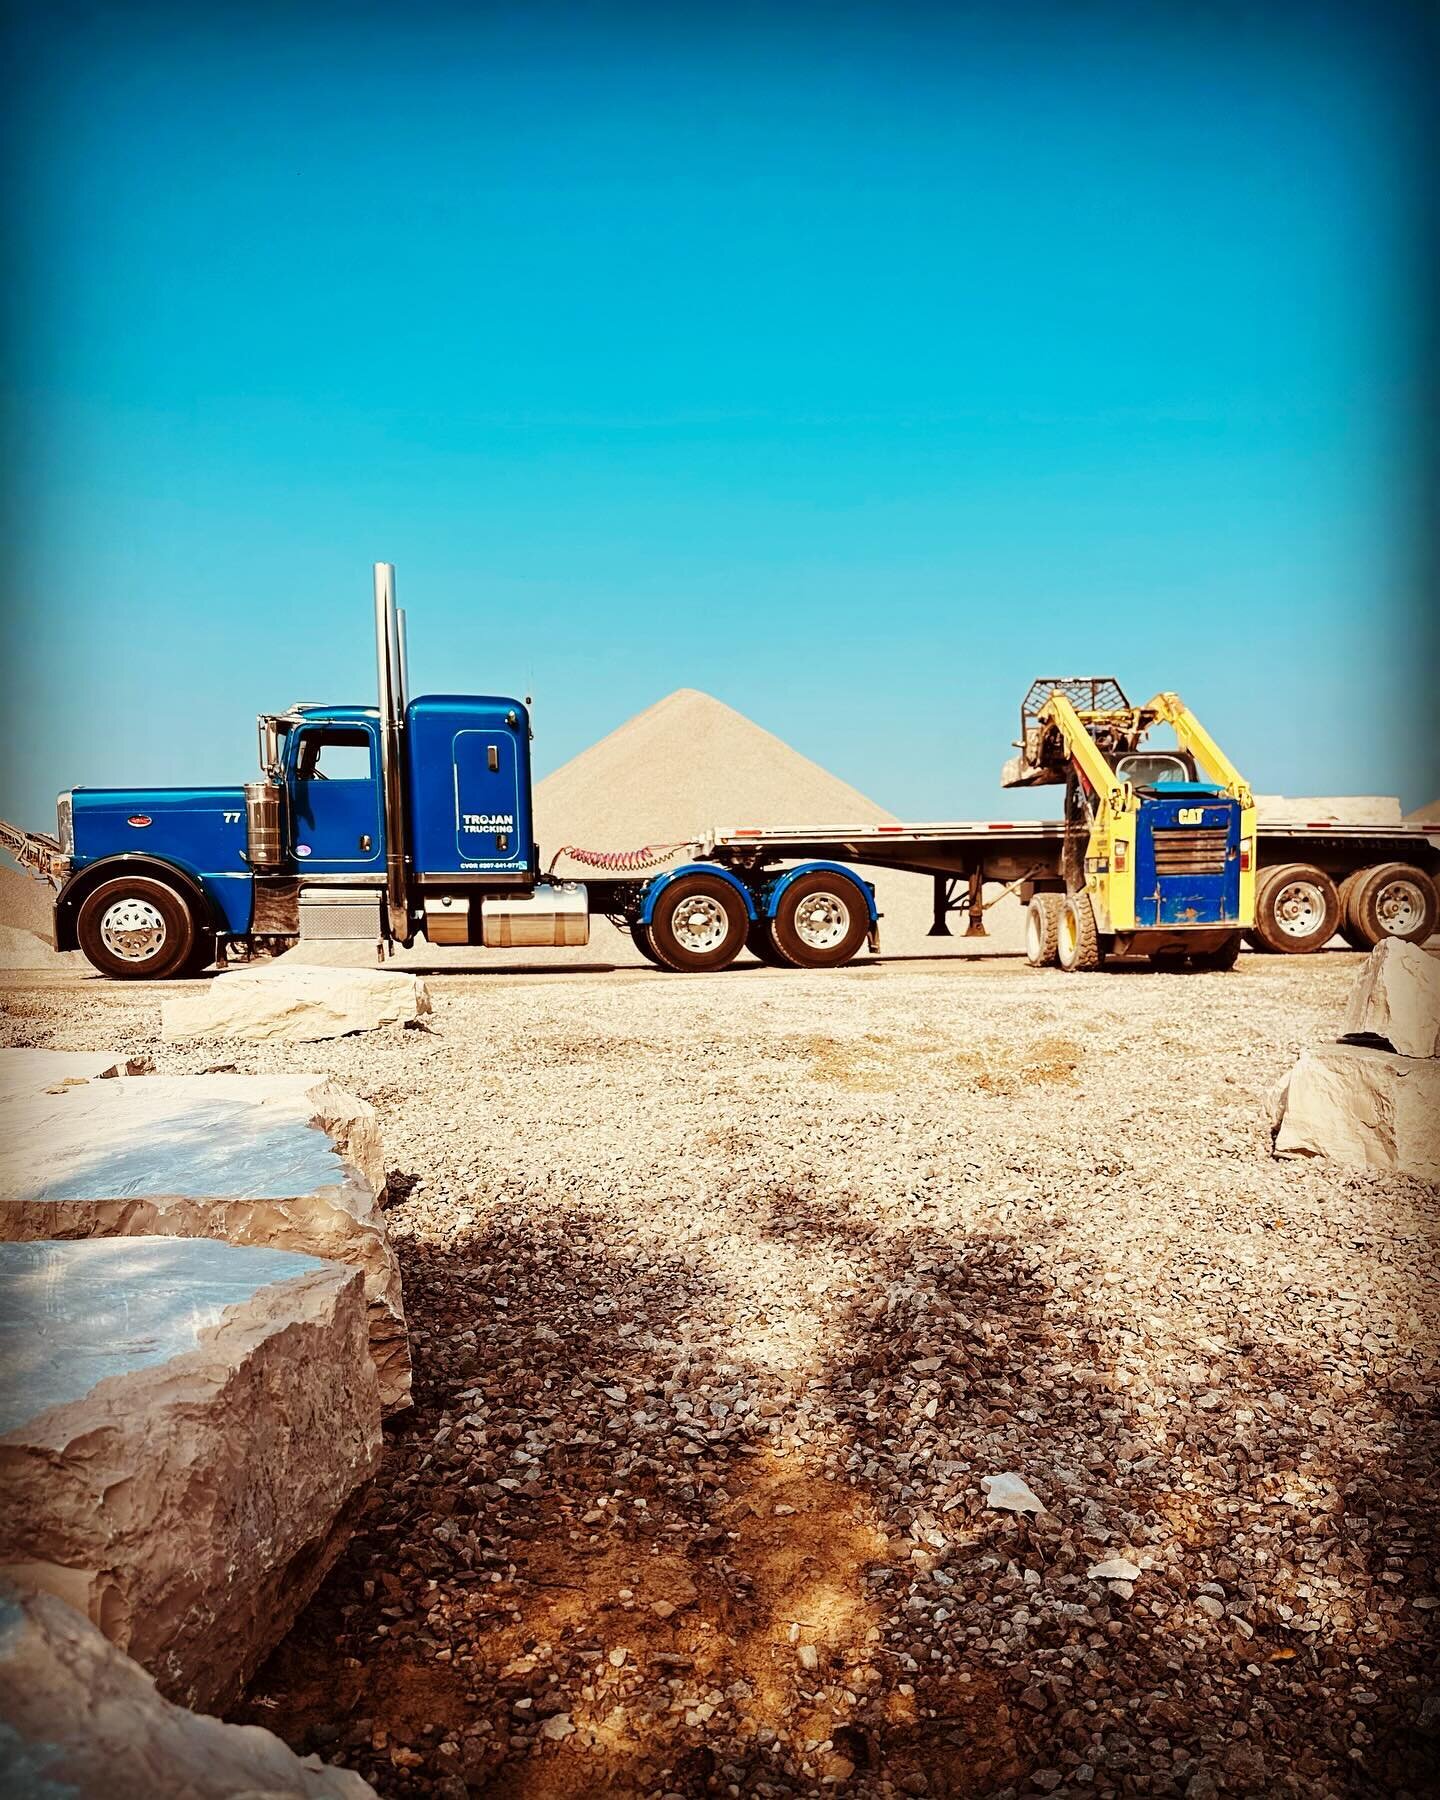 Loading up another rock solid load 💪🏼
.
.
.
#armourstone #truckload